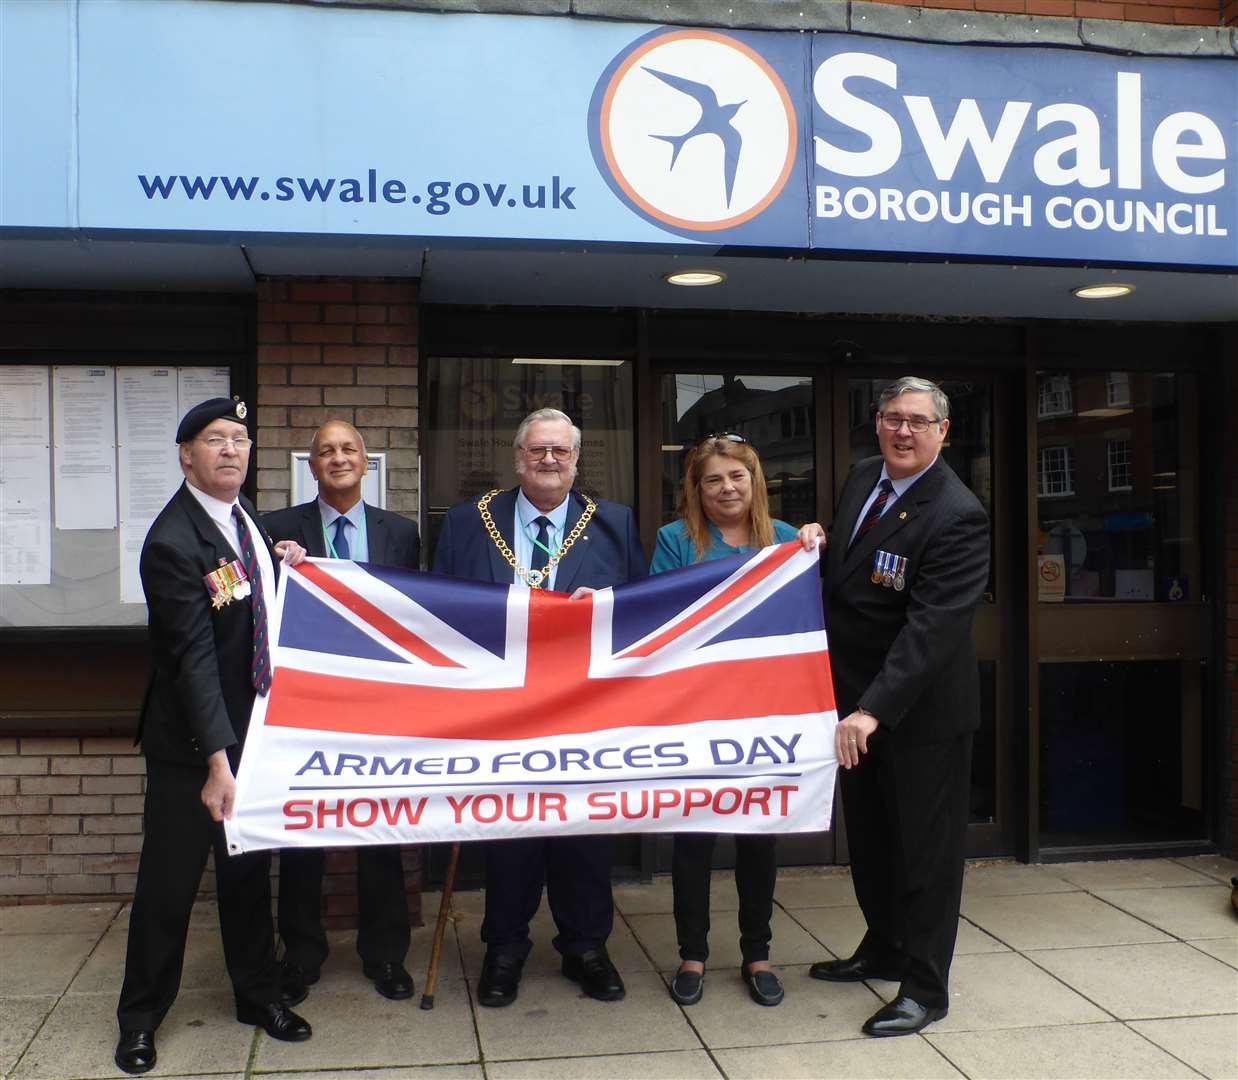 Sittingbourne has two processions on Armed Forces Day